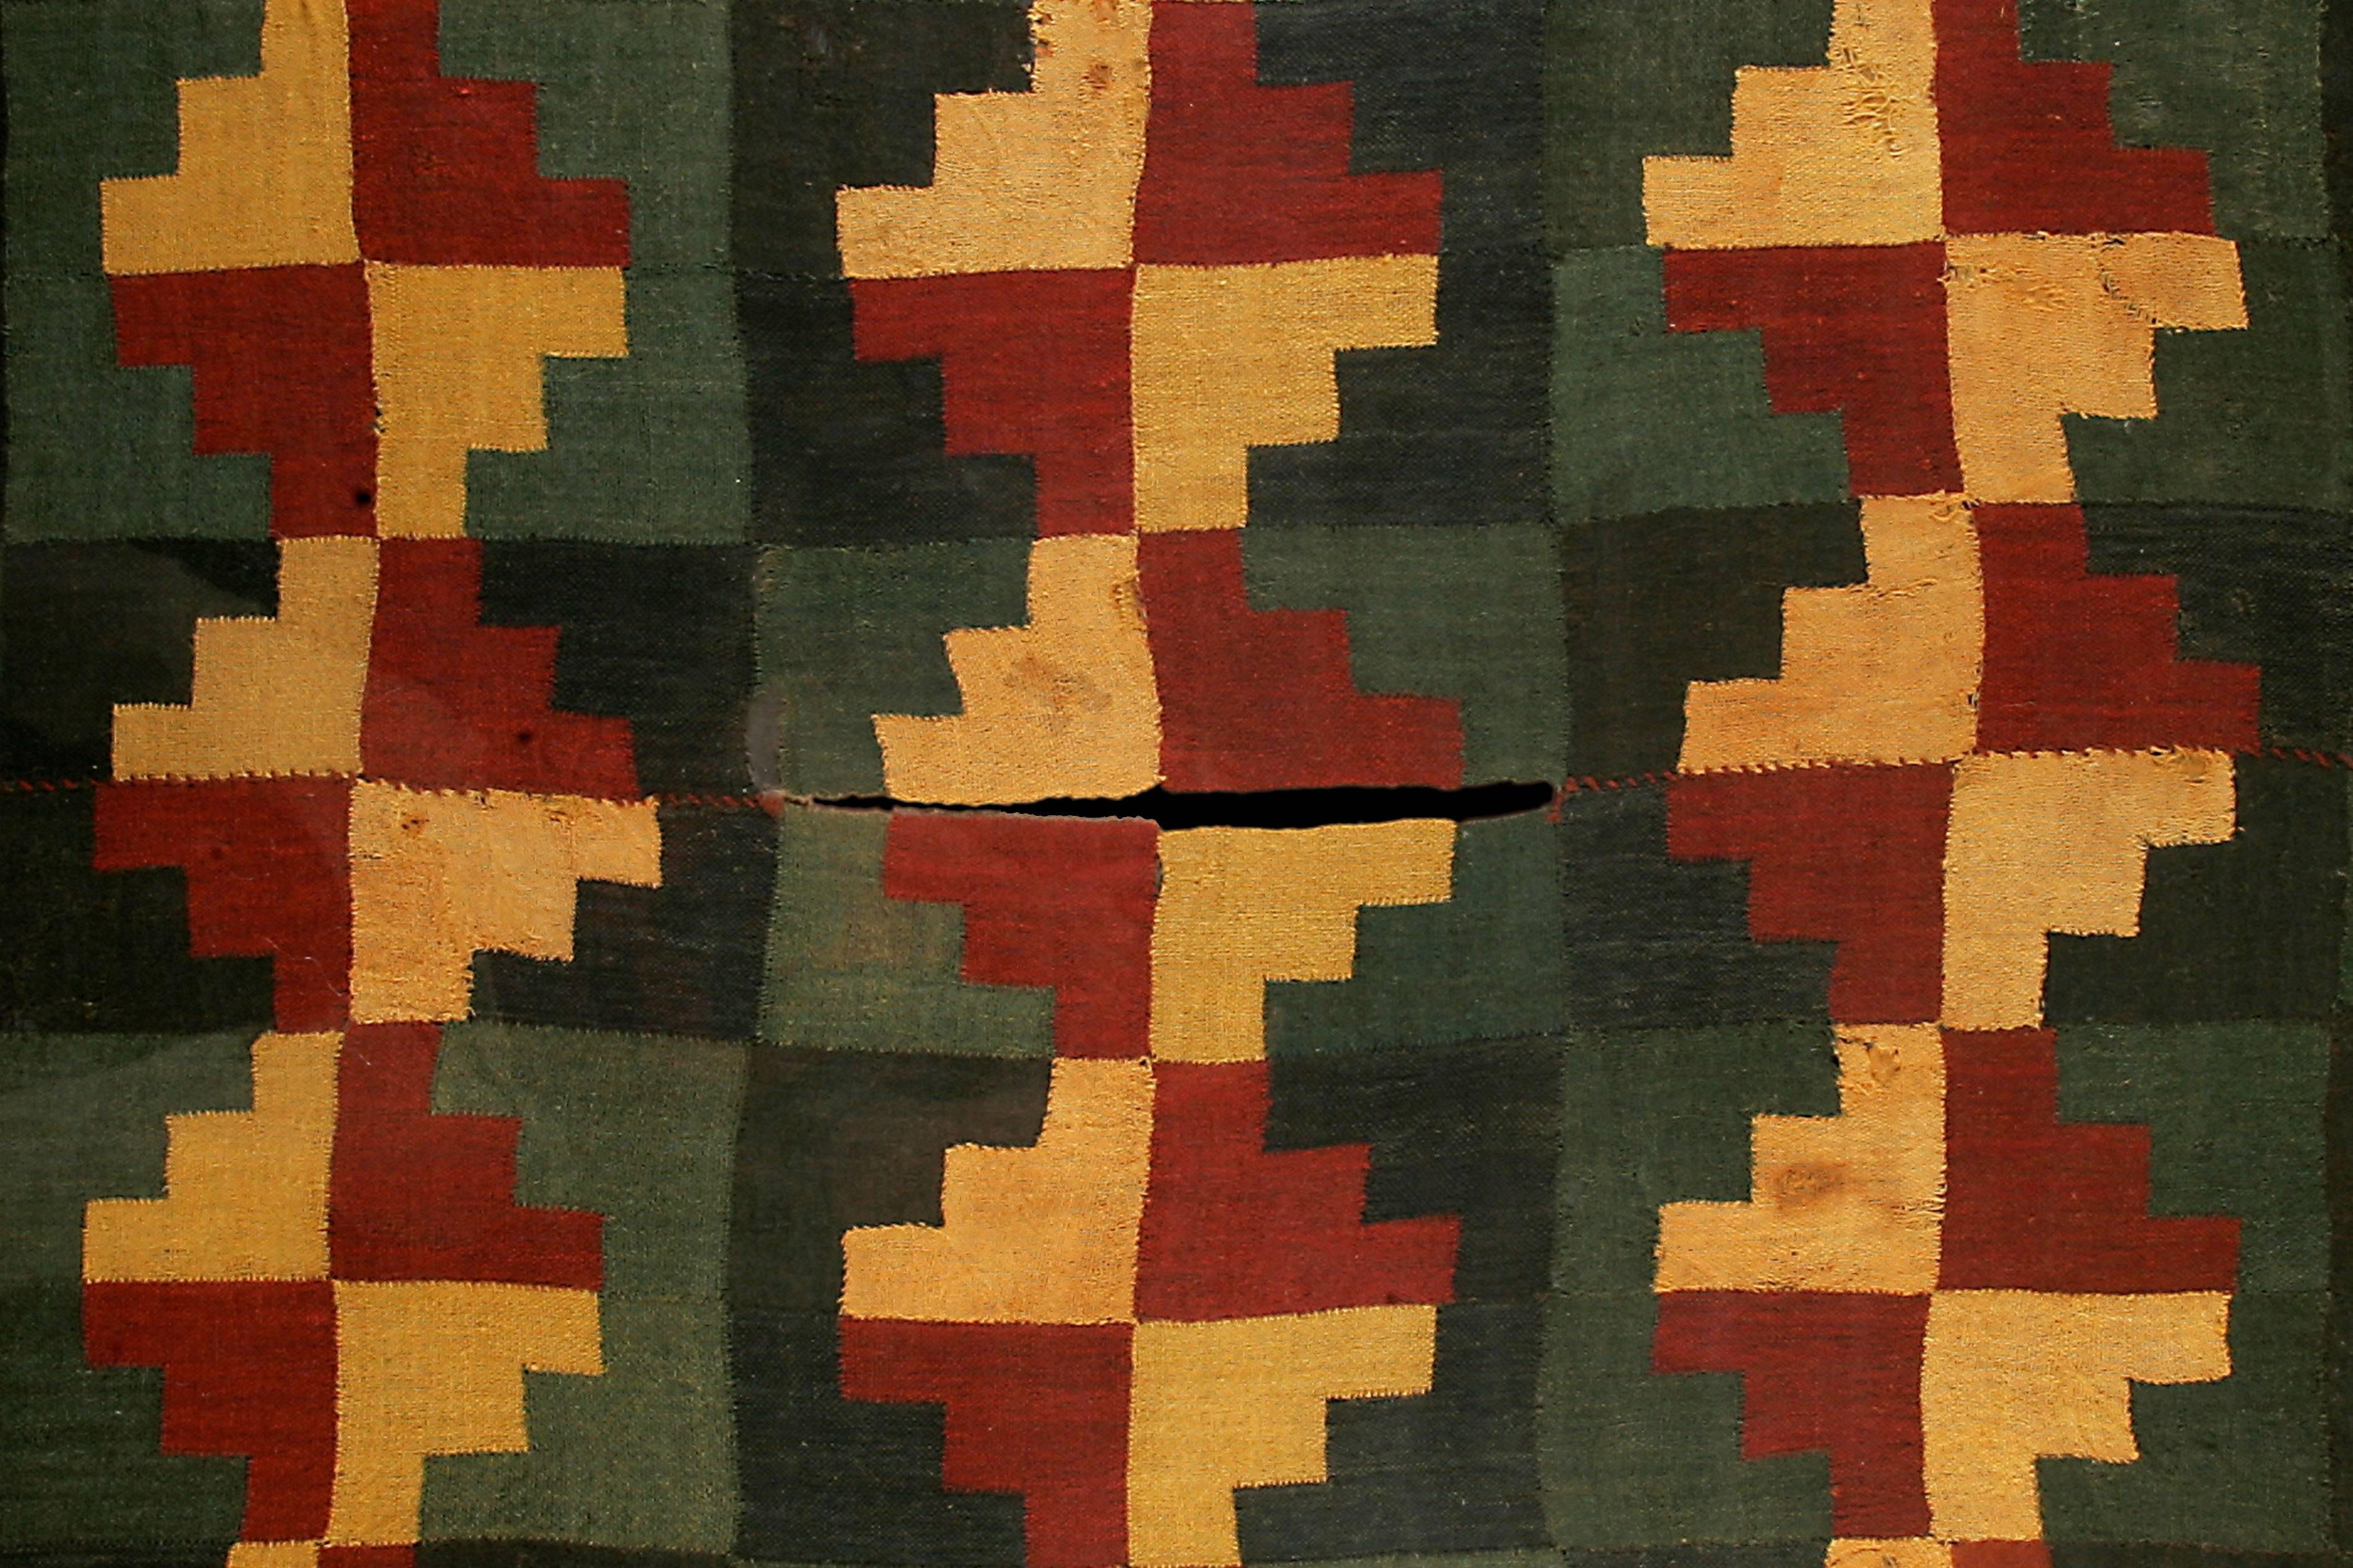 Impressive Nazca Cushma of checker works design composed of a red and yellow cross over the green background. A true collector's piece. 


Provenance: From the Collection of Guillot Munoz

Additional documentation accompanying the piece: 
-